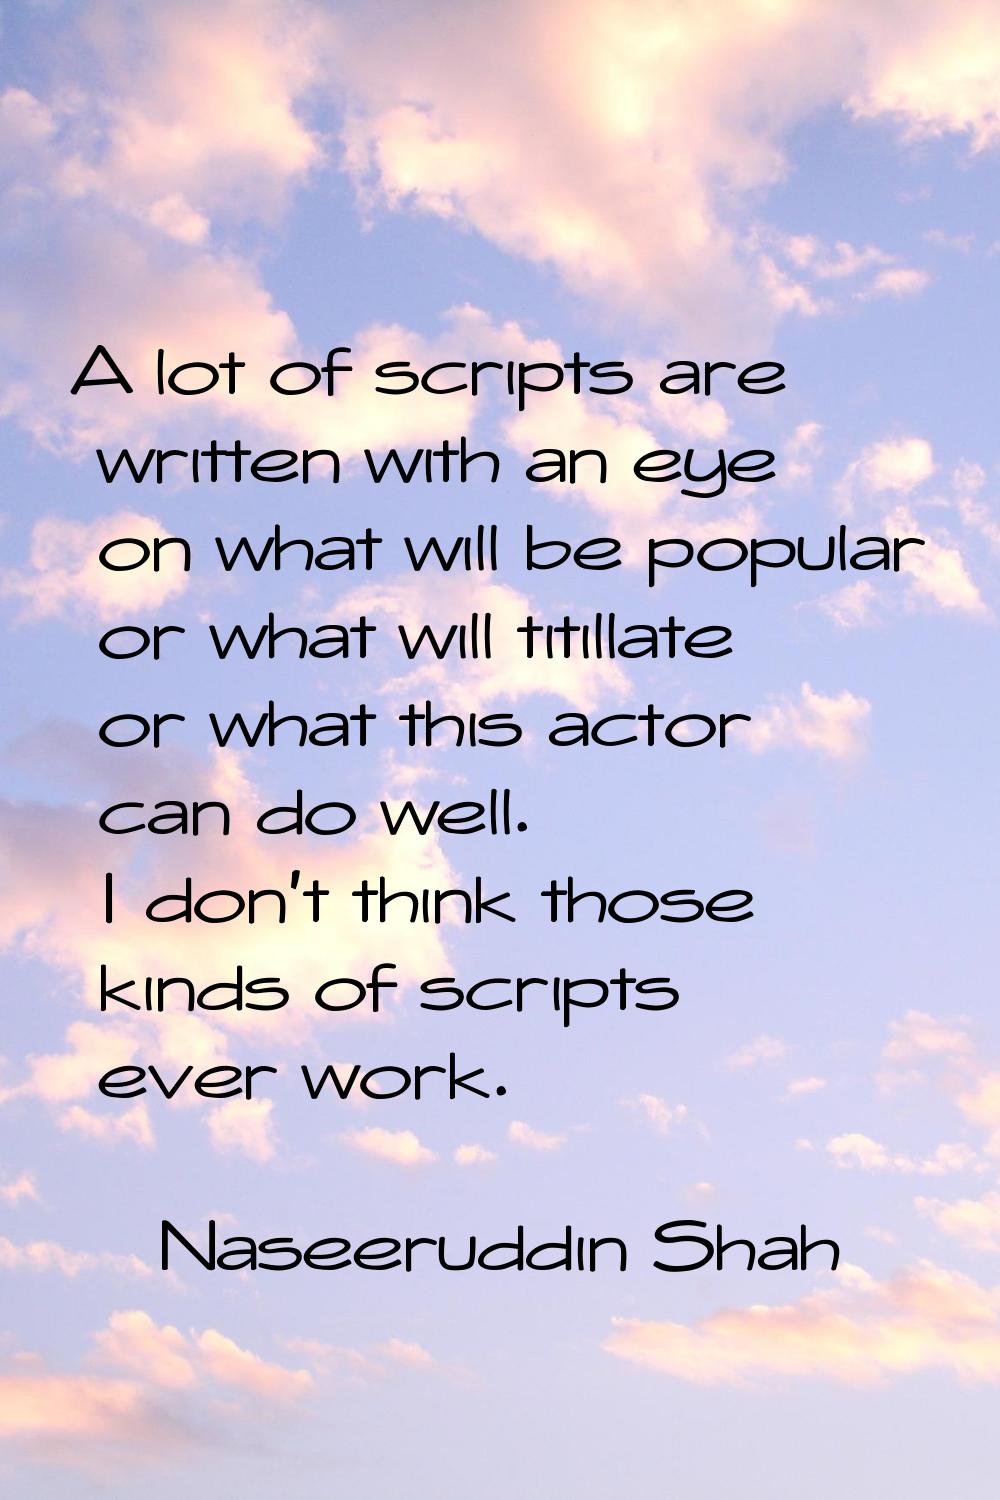 A lot of scripts are written with an eye on what will be popular or what will titillate or what thi